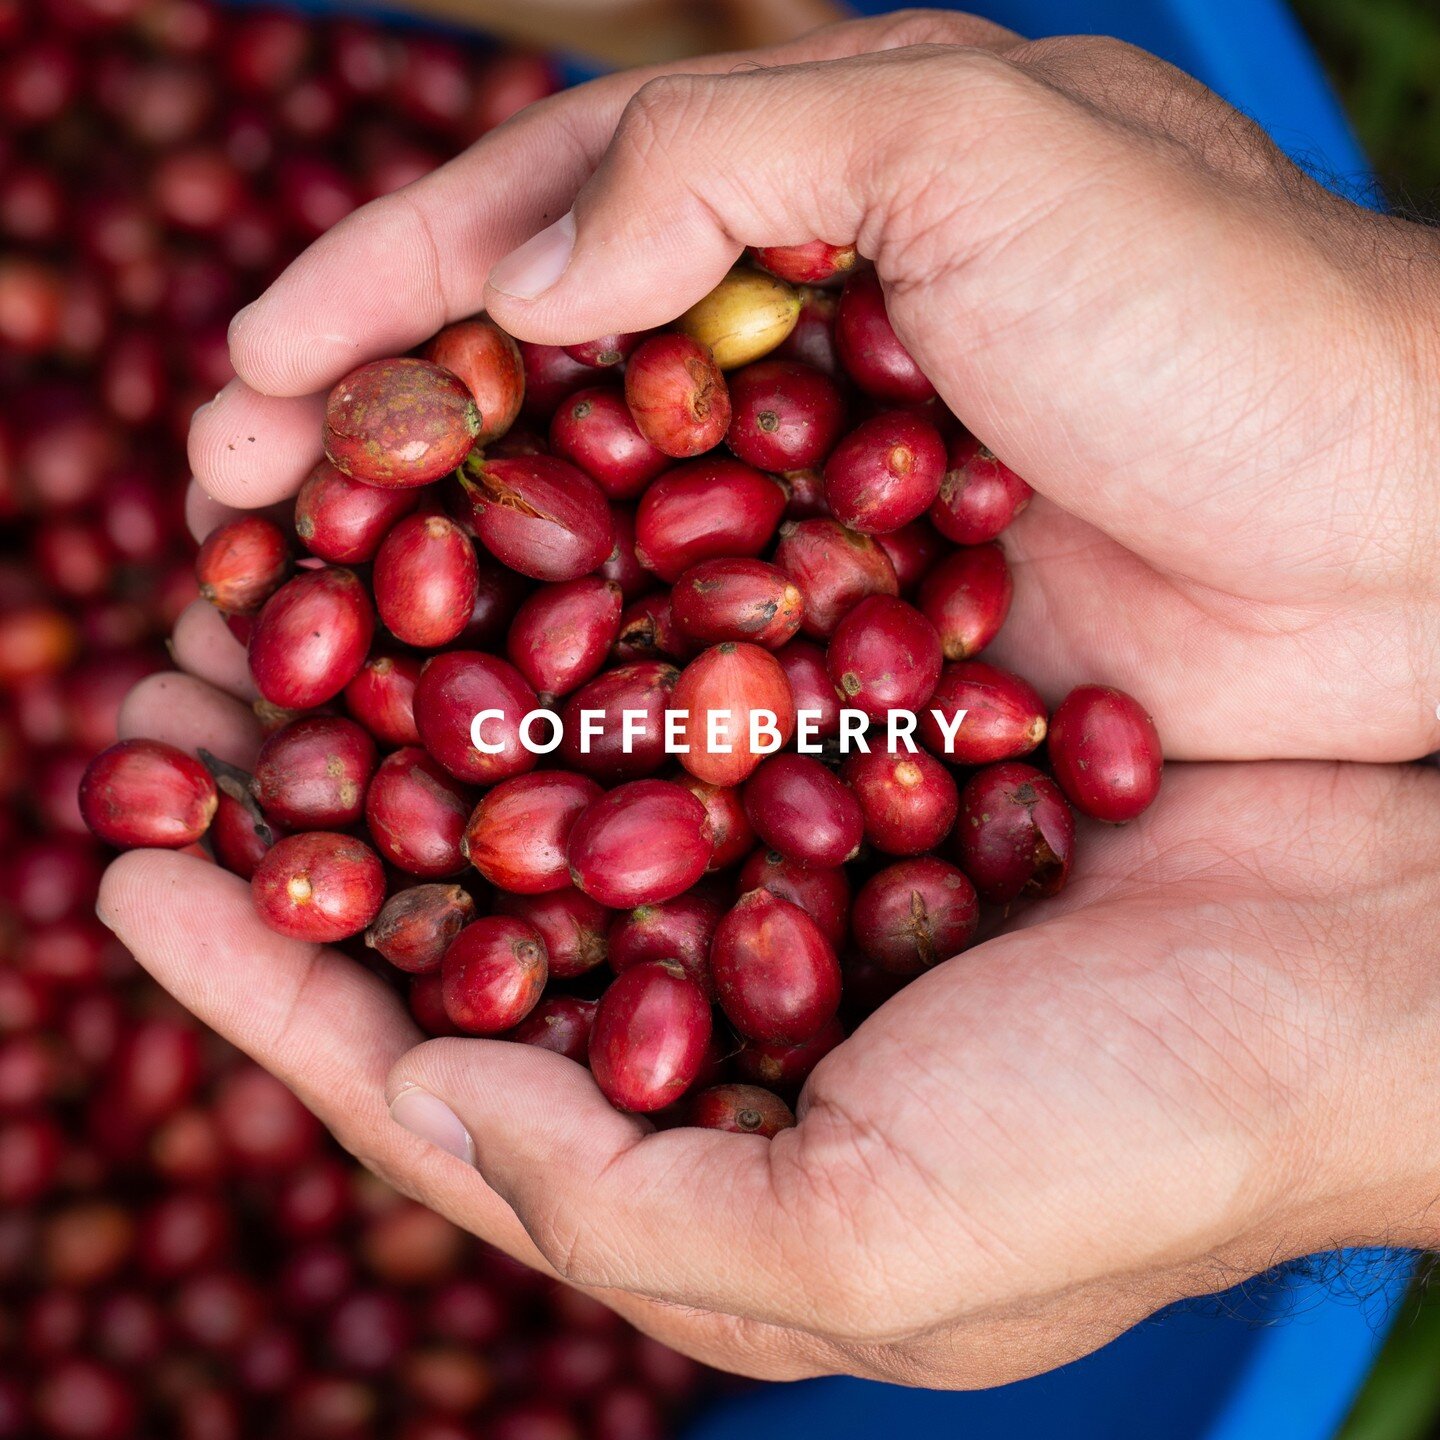 CoffeeBerry is perhaps the most exciting addition to the skin care industry in recent years and is on par to become a veritable craze. When applied topically to the skin, CoffeeBerry has been shown to restore moisture and elasticity, making the skin 